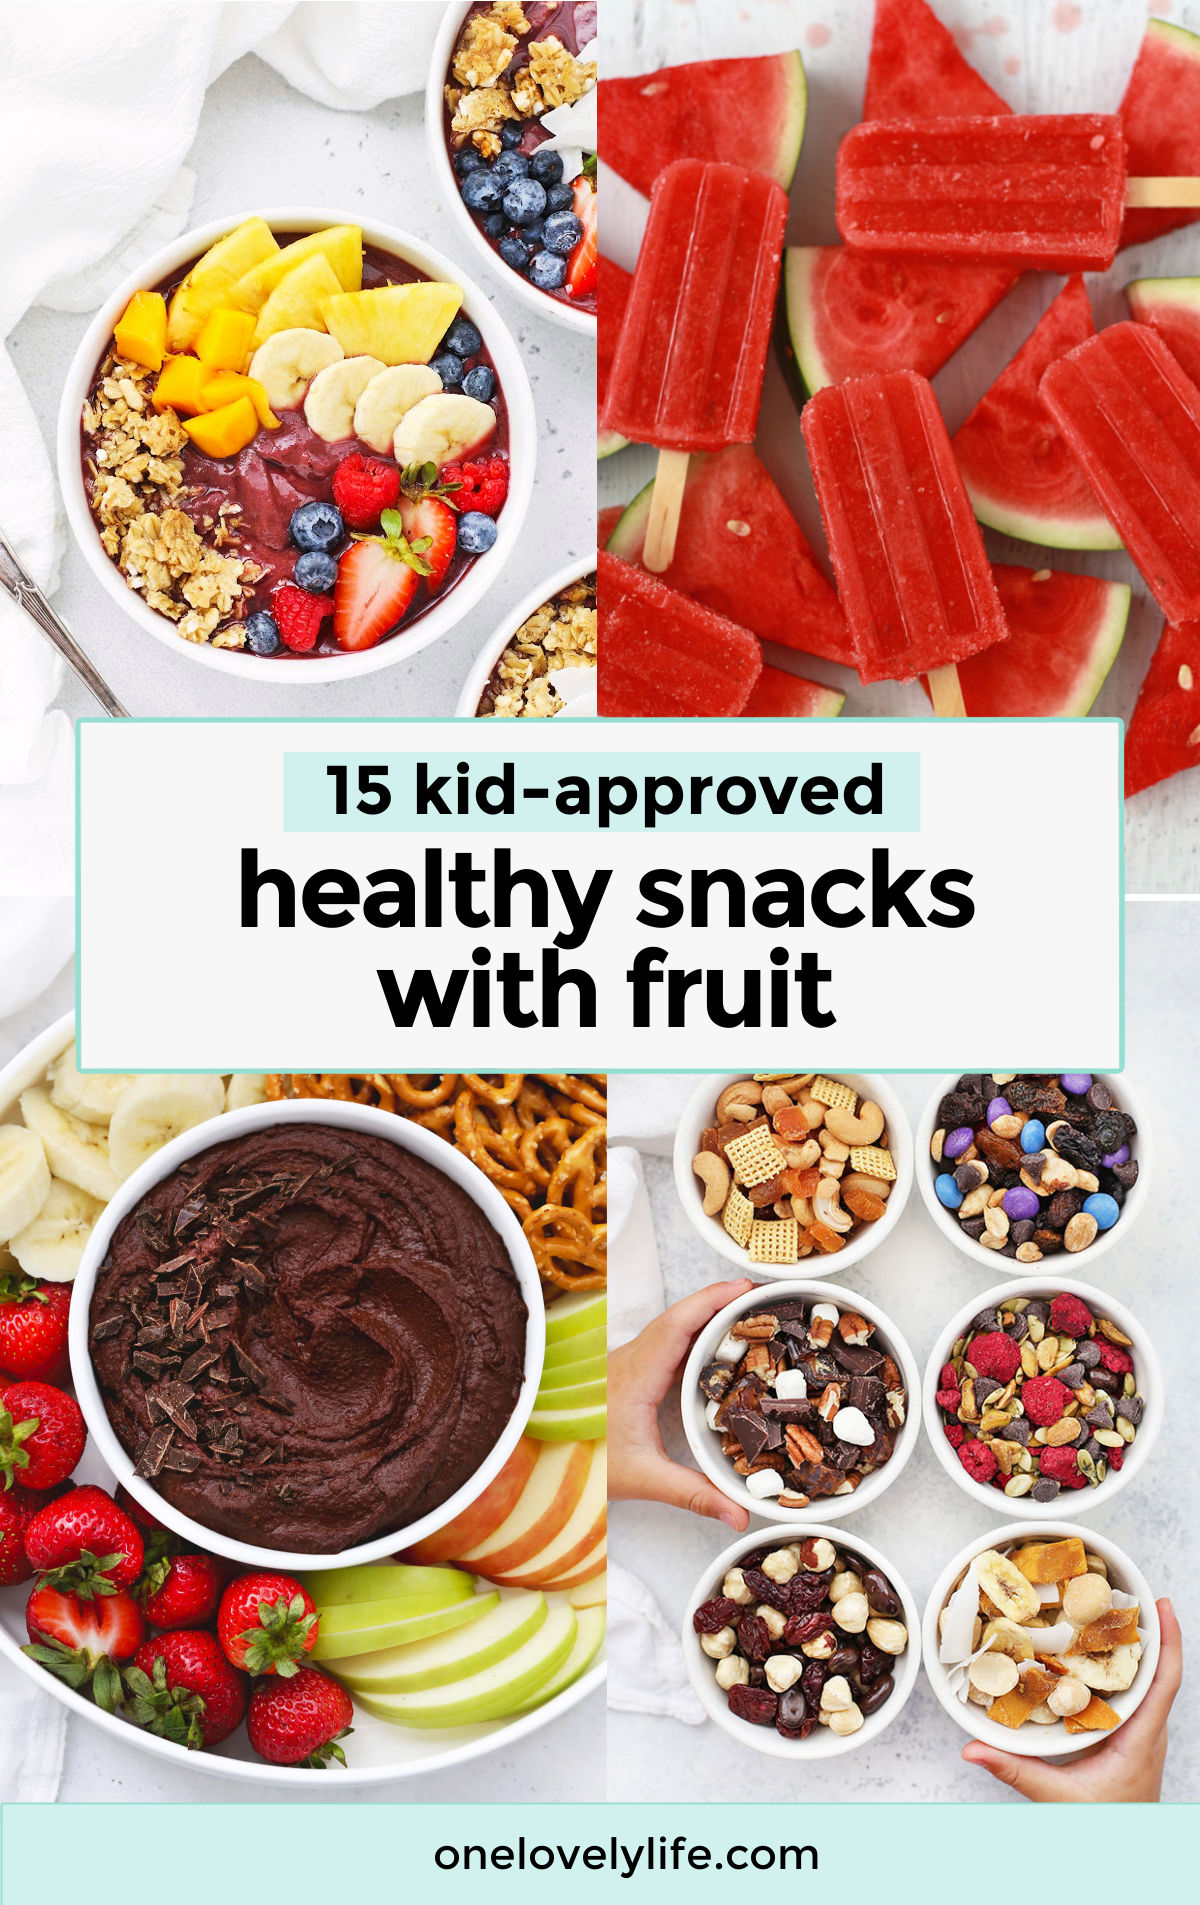 15+ Healthy Snacks with Fruit - These Healthy Snack Ideas are totally kid approved! (Gluten free, vegan, and paleo options!) // Healthy kids Snacks // Healthy Snacks for Kids #healthysnack #kidssnacks #funsnack #fruit